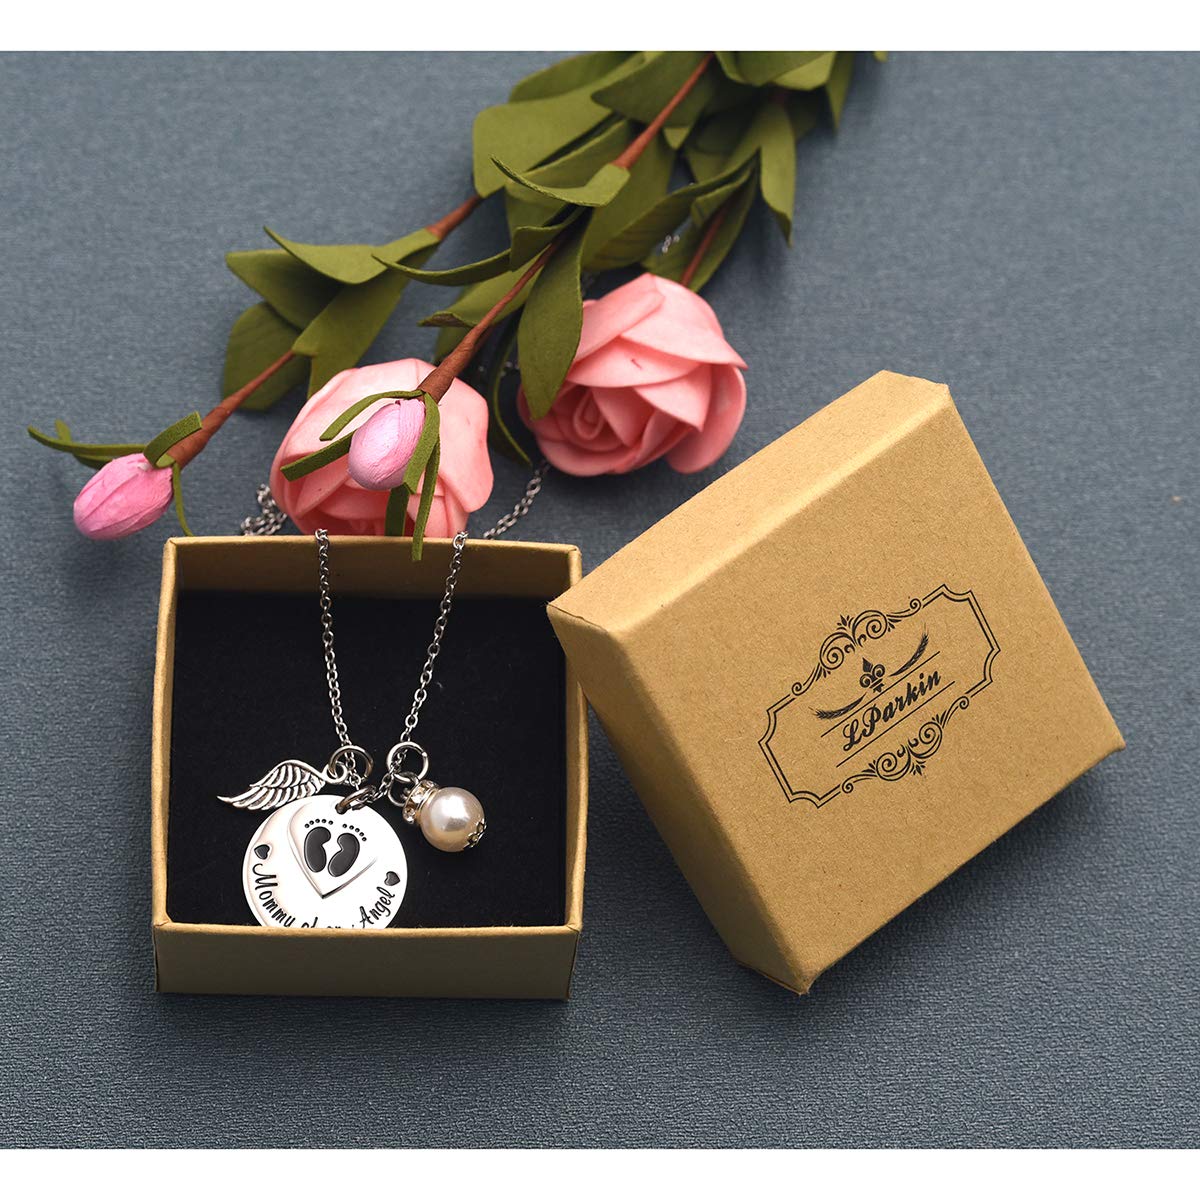 LParkin Mommy of an Angel Necklace Infant Child Loss Memorial Pregnancy Loss Miscarriage Stillborn (Necklace)